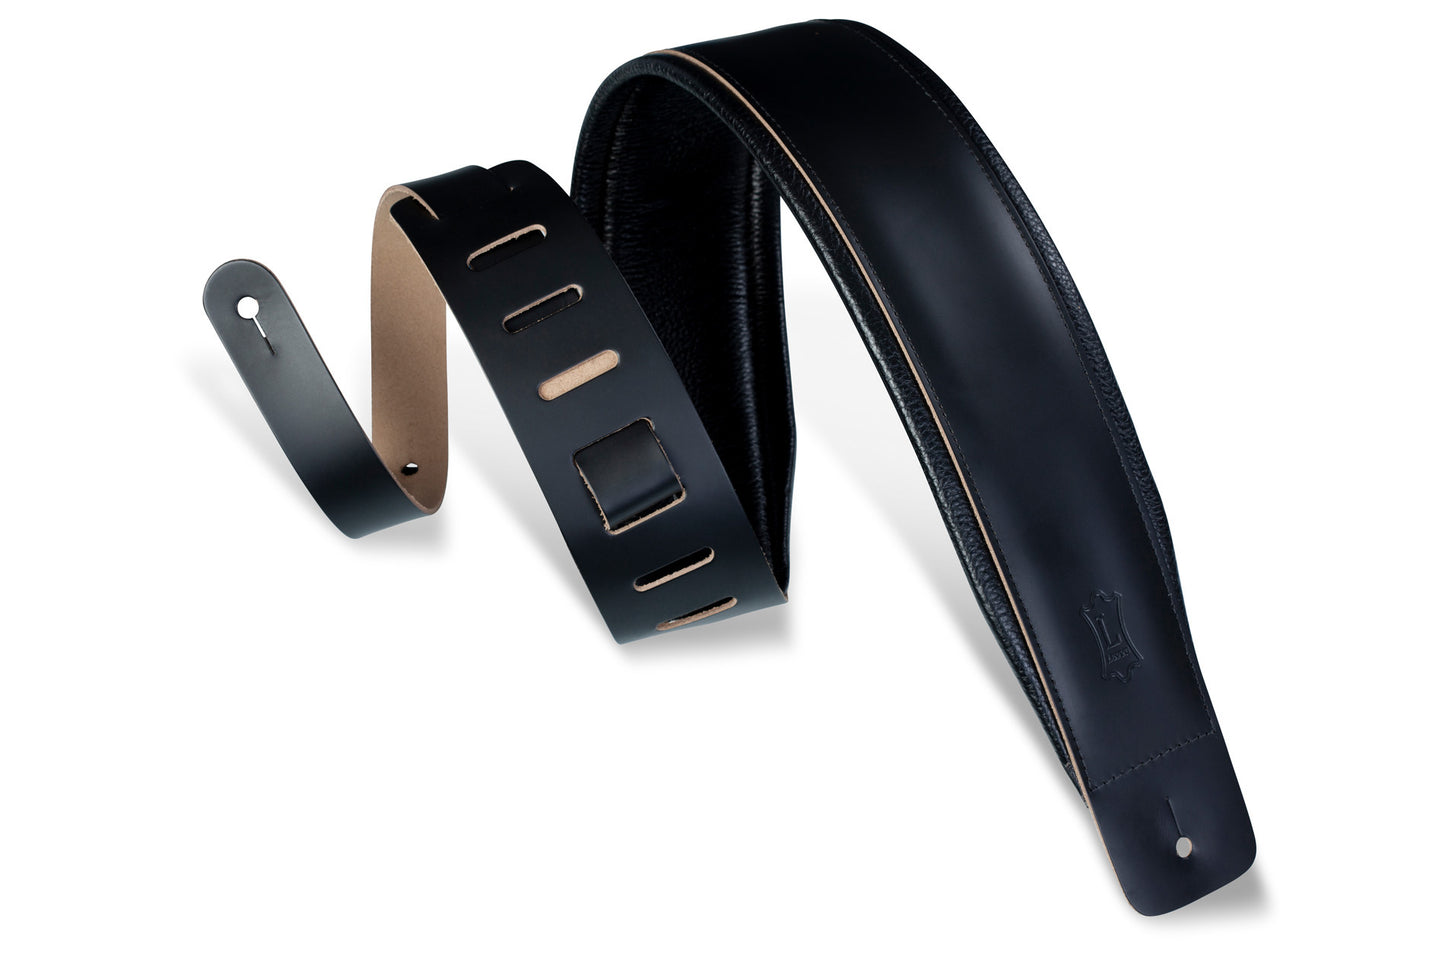 Levy's Leathers - DM1PD-BLK - 3" Wide Black Genuine Leather Guitar Strap.